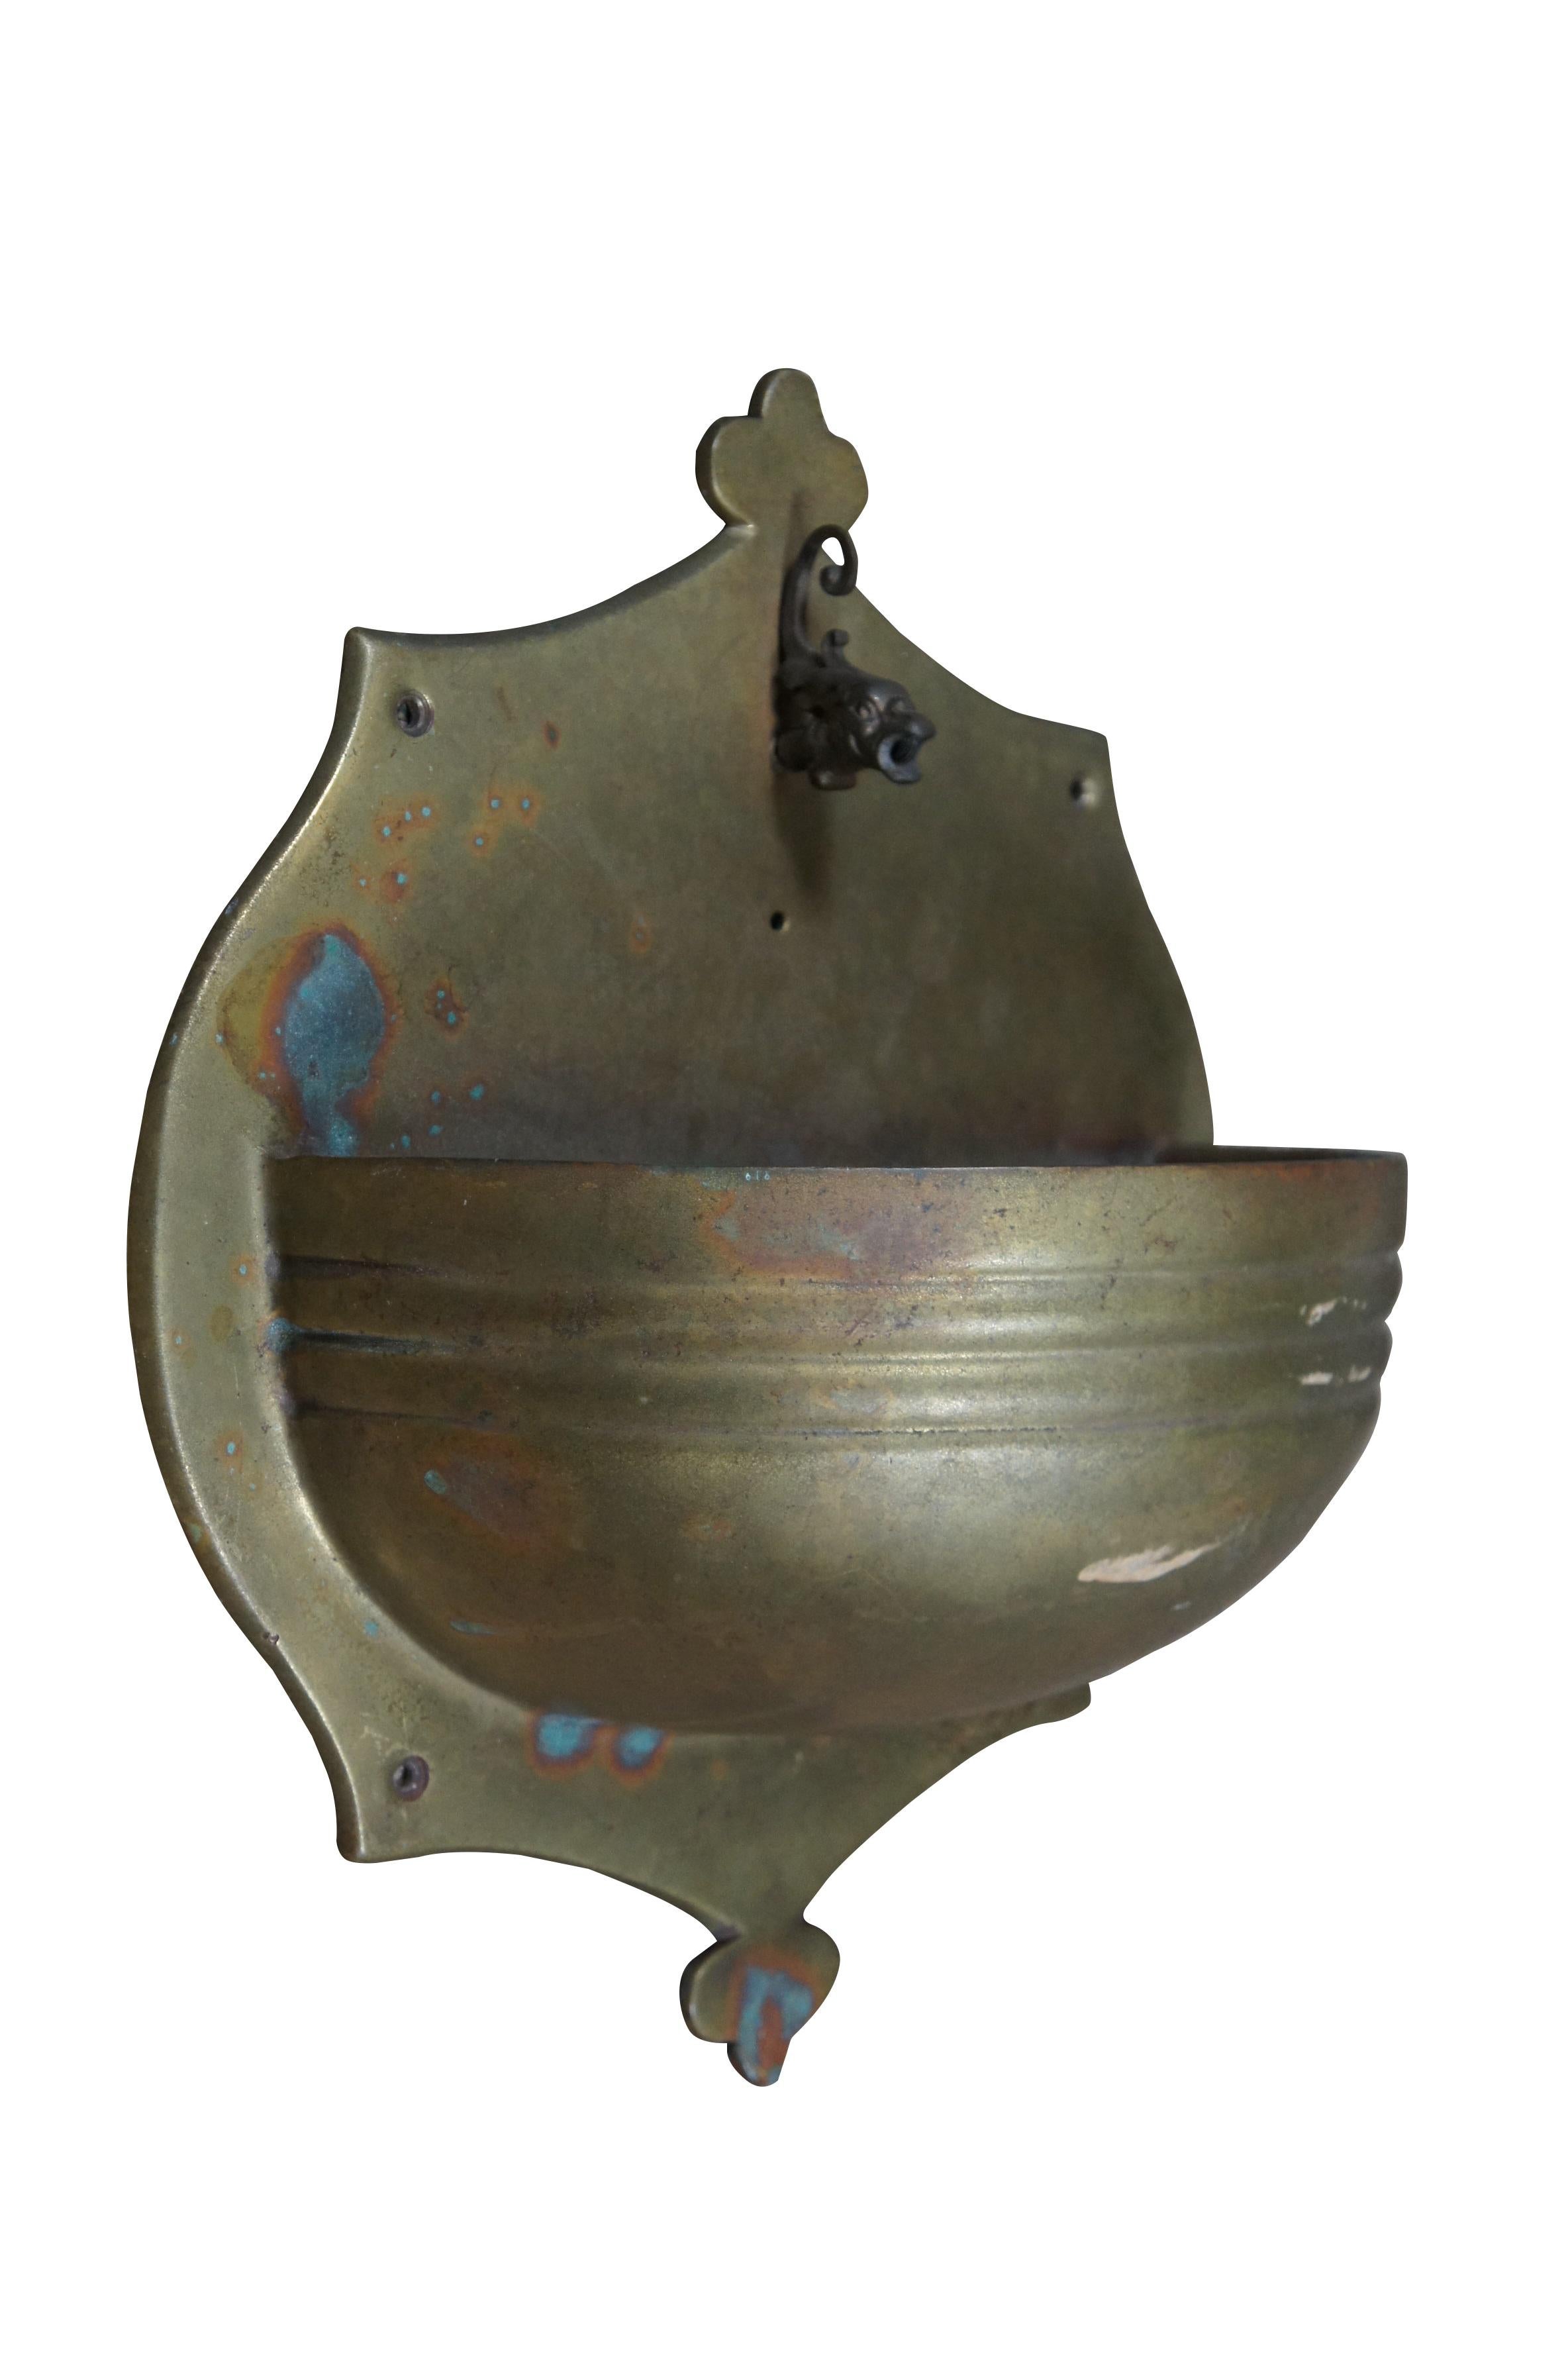 20th century solid brass European wall mounted lavabo / fountain with a spout in the shape of the head of a dolphin / fish with swirling head feathers and open mouth. Very Heavy.

Dimensions:
15.5